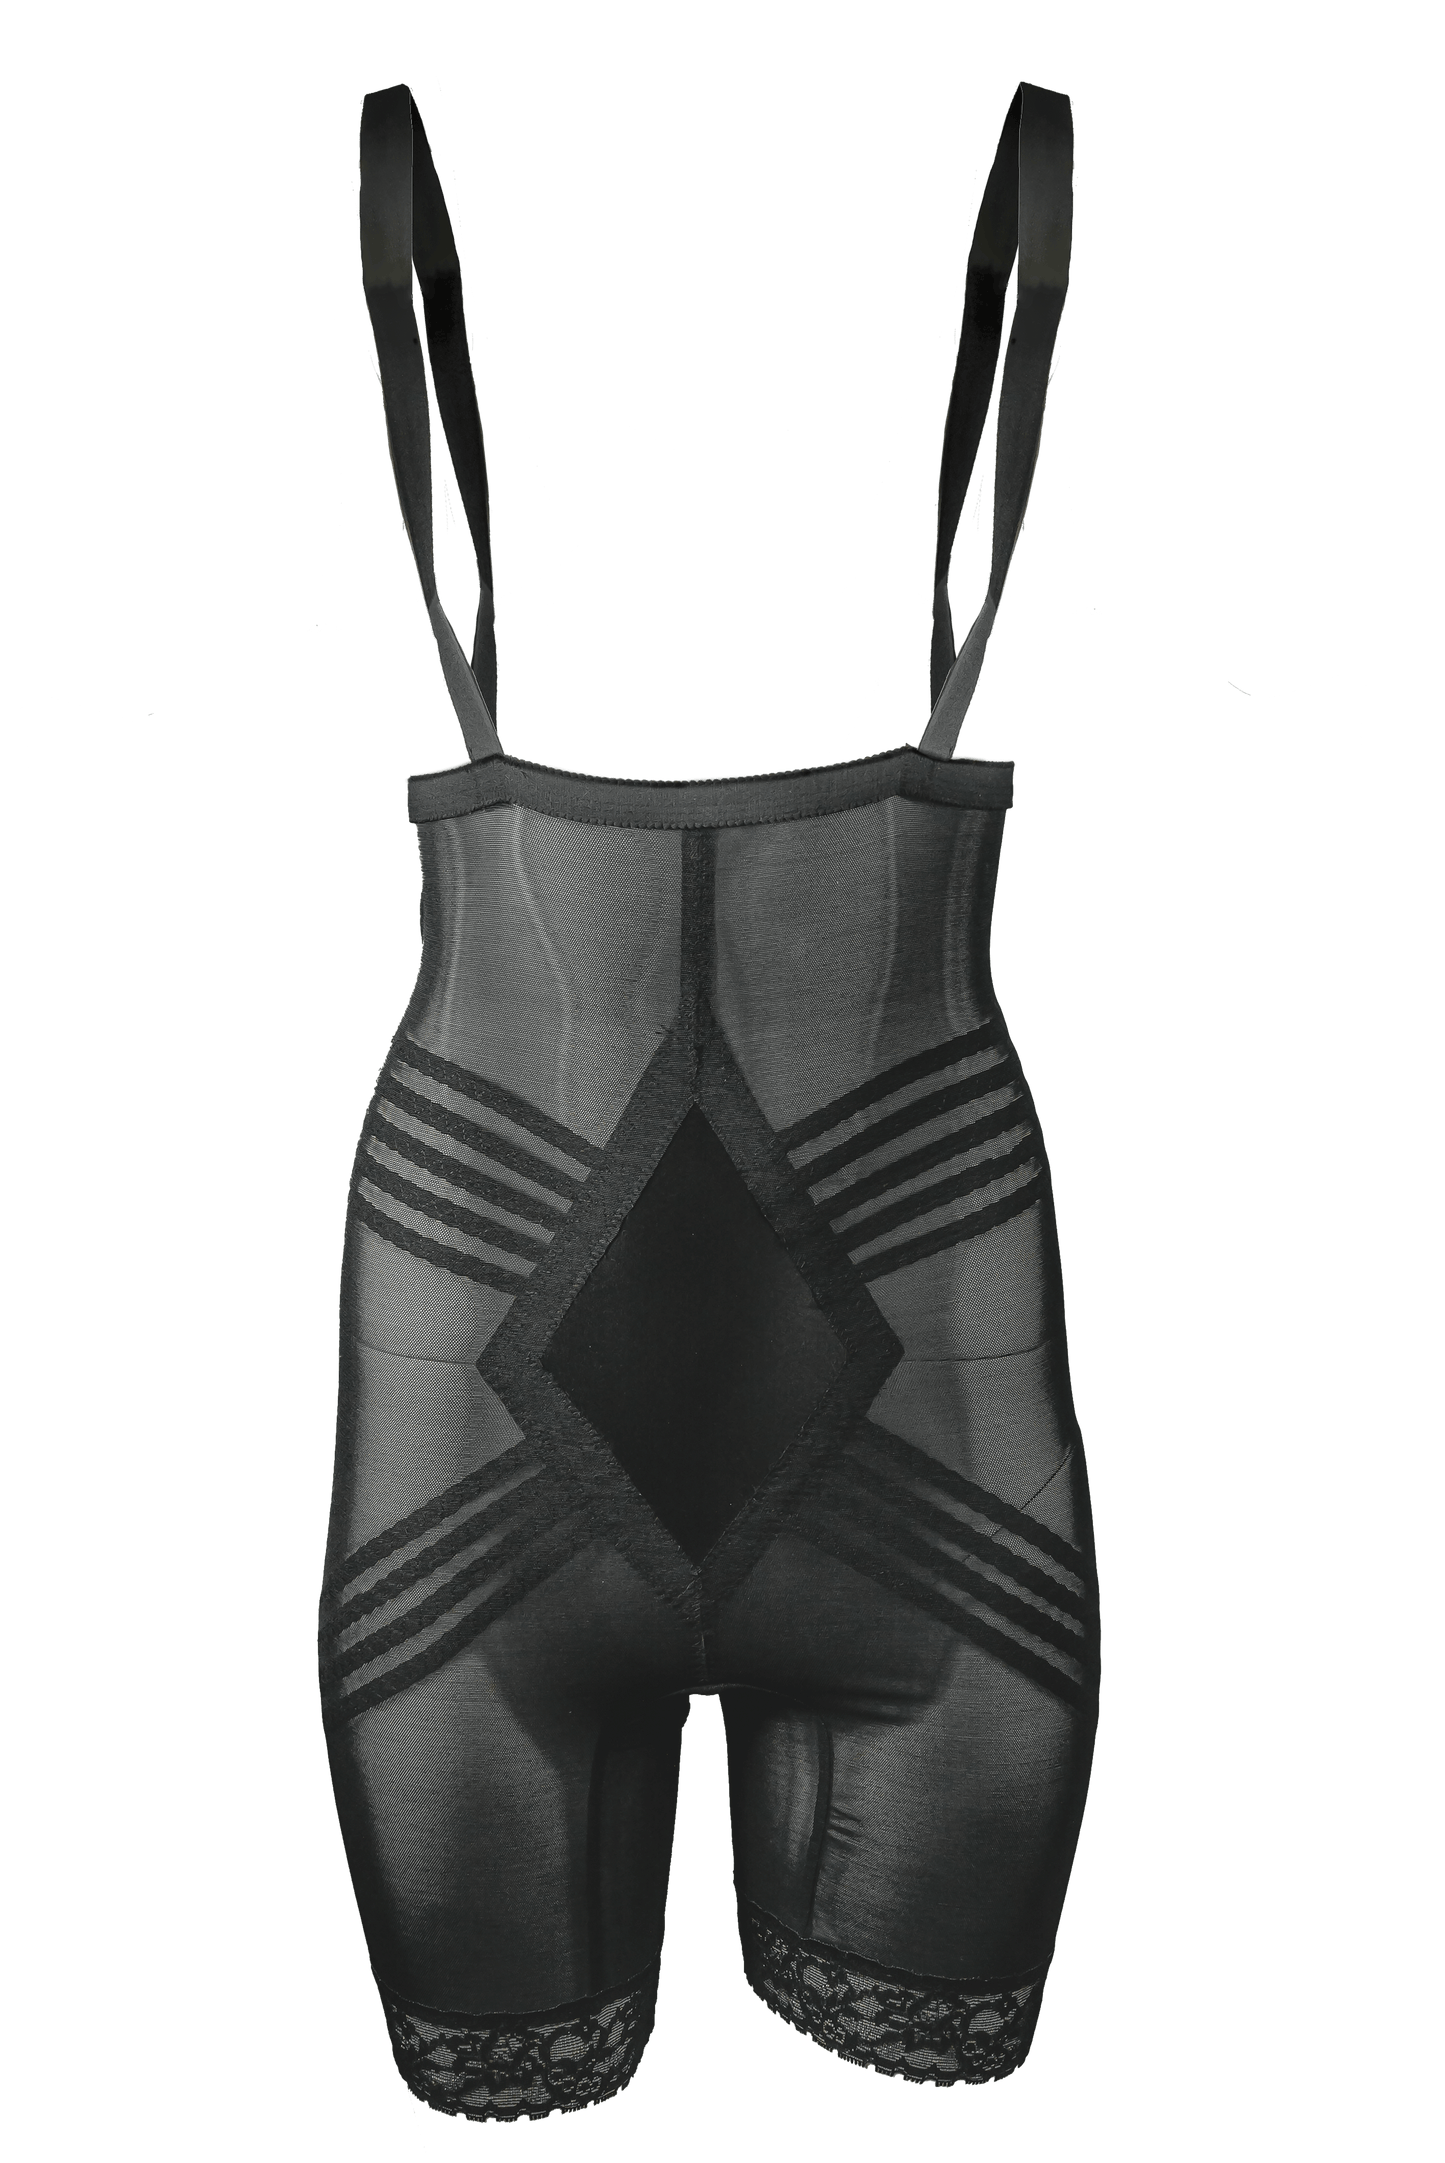 Rago Shapewear - Do you need extra support? #2202 has your back